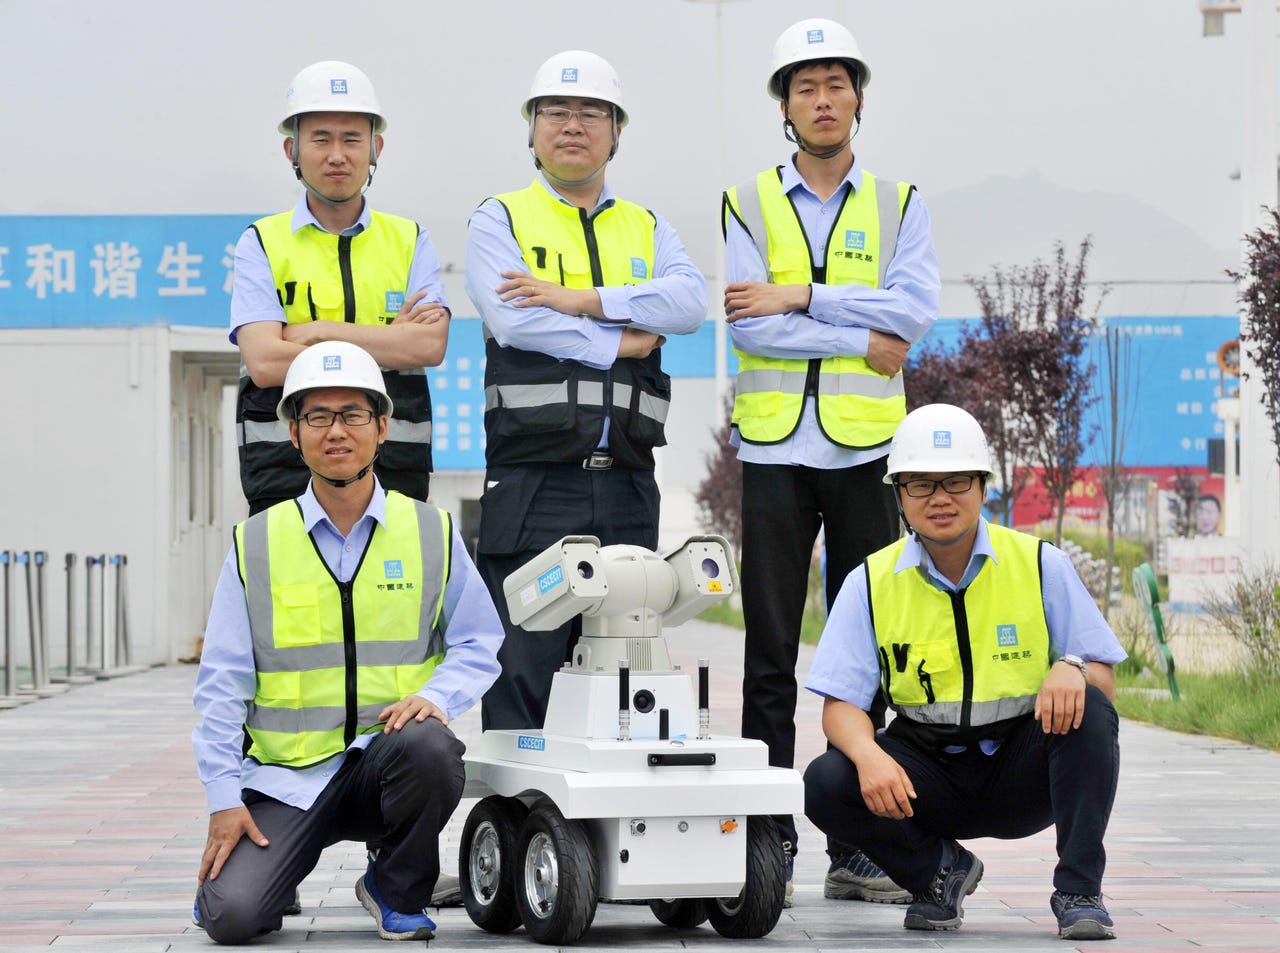 Five people in safety gear posed for a team photo with a wheeled inspection robot.